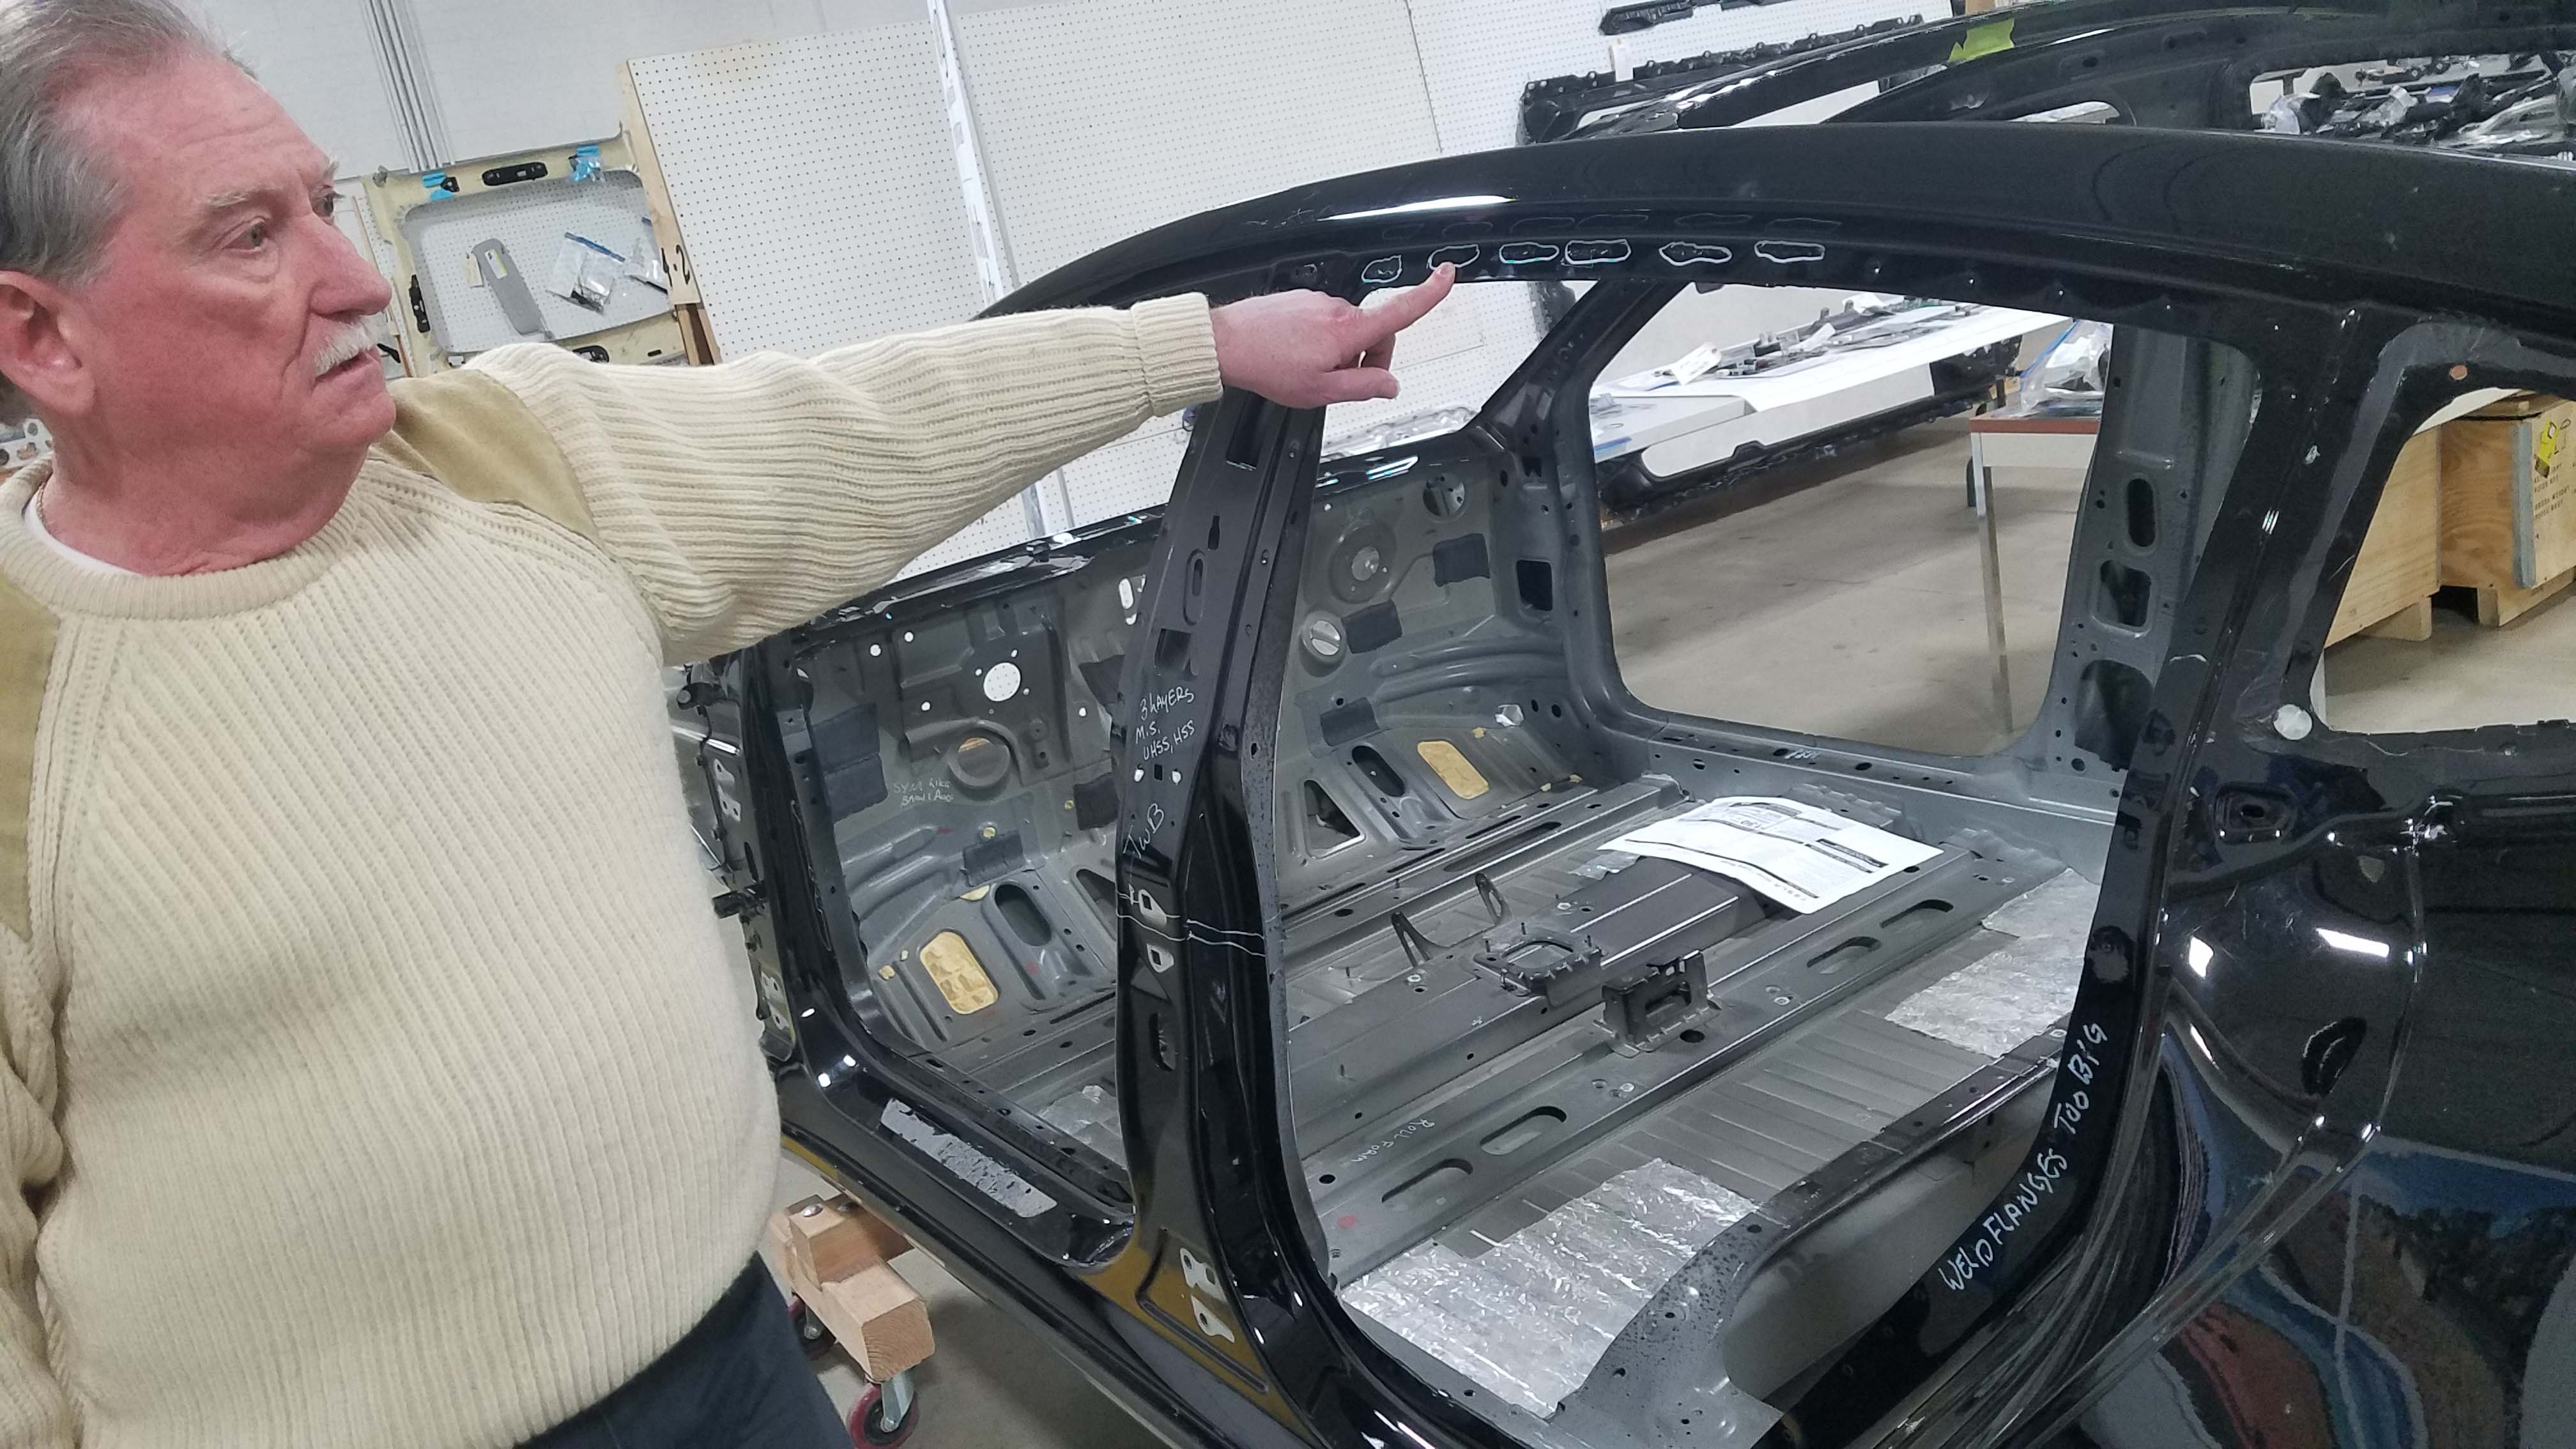 Munro & Assoc. CEP Sandy Munro points out the three different fastening systems for the Tesla Model 3 rear door fame - an example of the manufacturing complexity required of the Tesla.